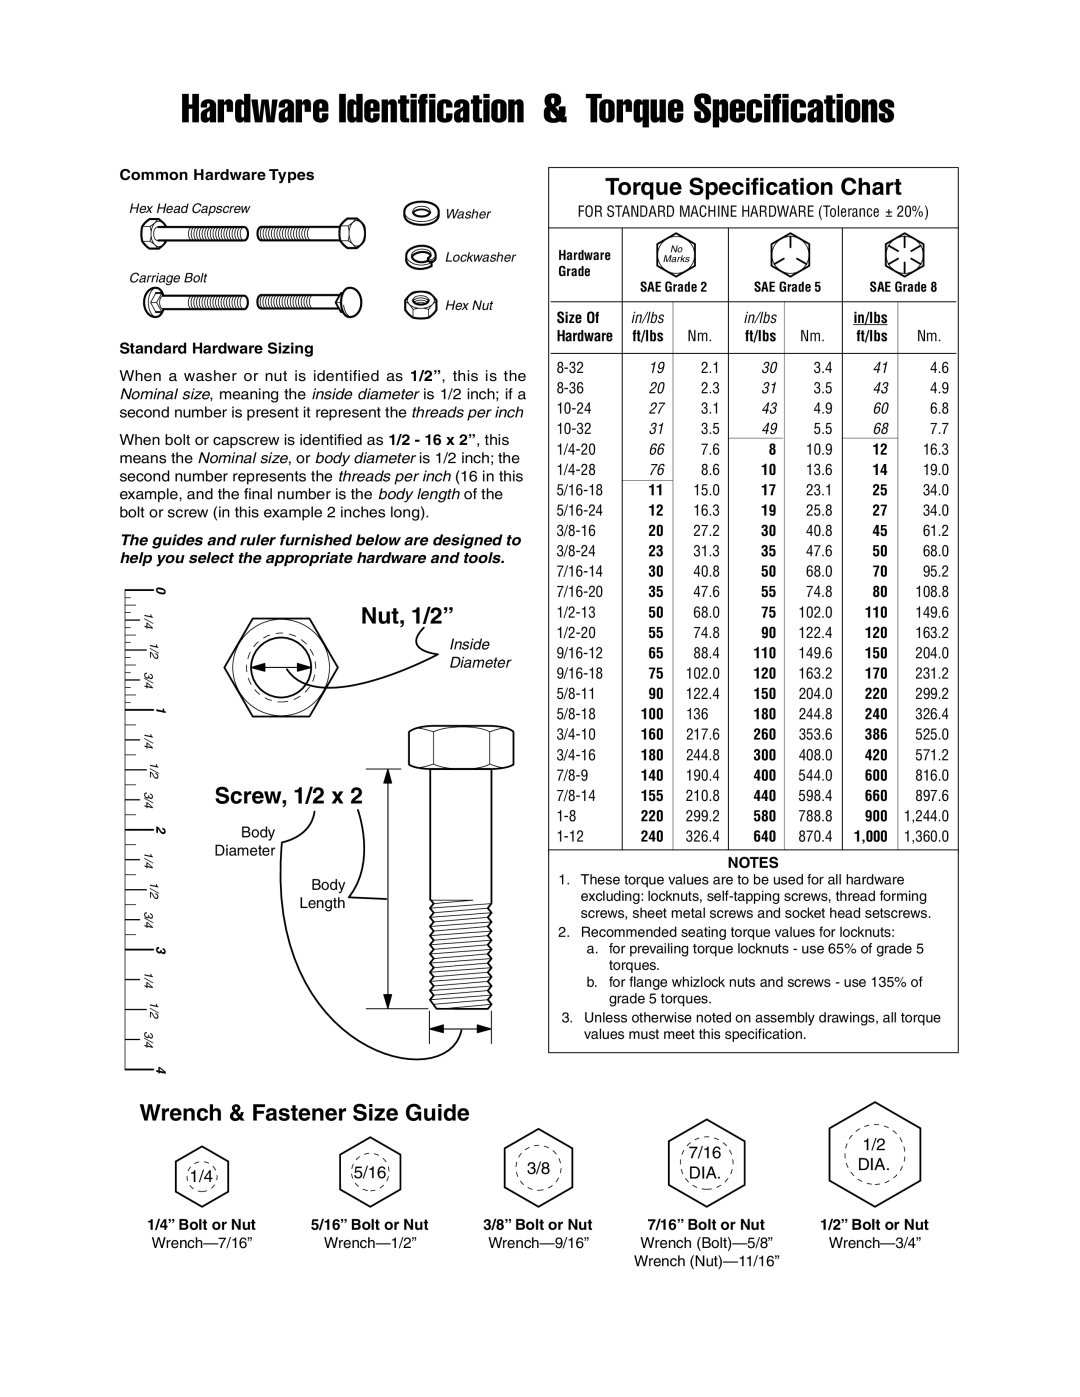 Simplicity 1694957 Wrench & Fastener Size Guide, Hardware Identification & Torque Specifications, Nut, 1/2”, Screw, 1/2 